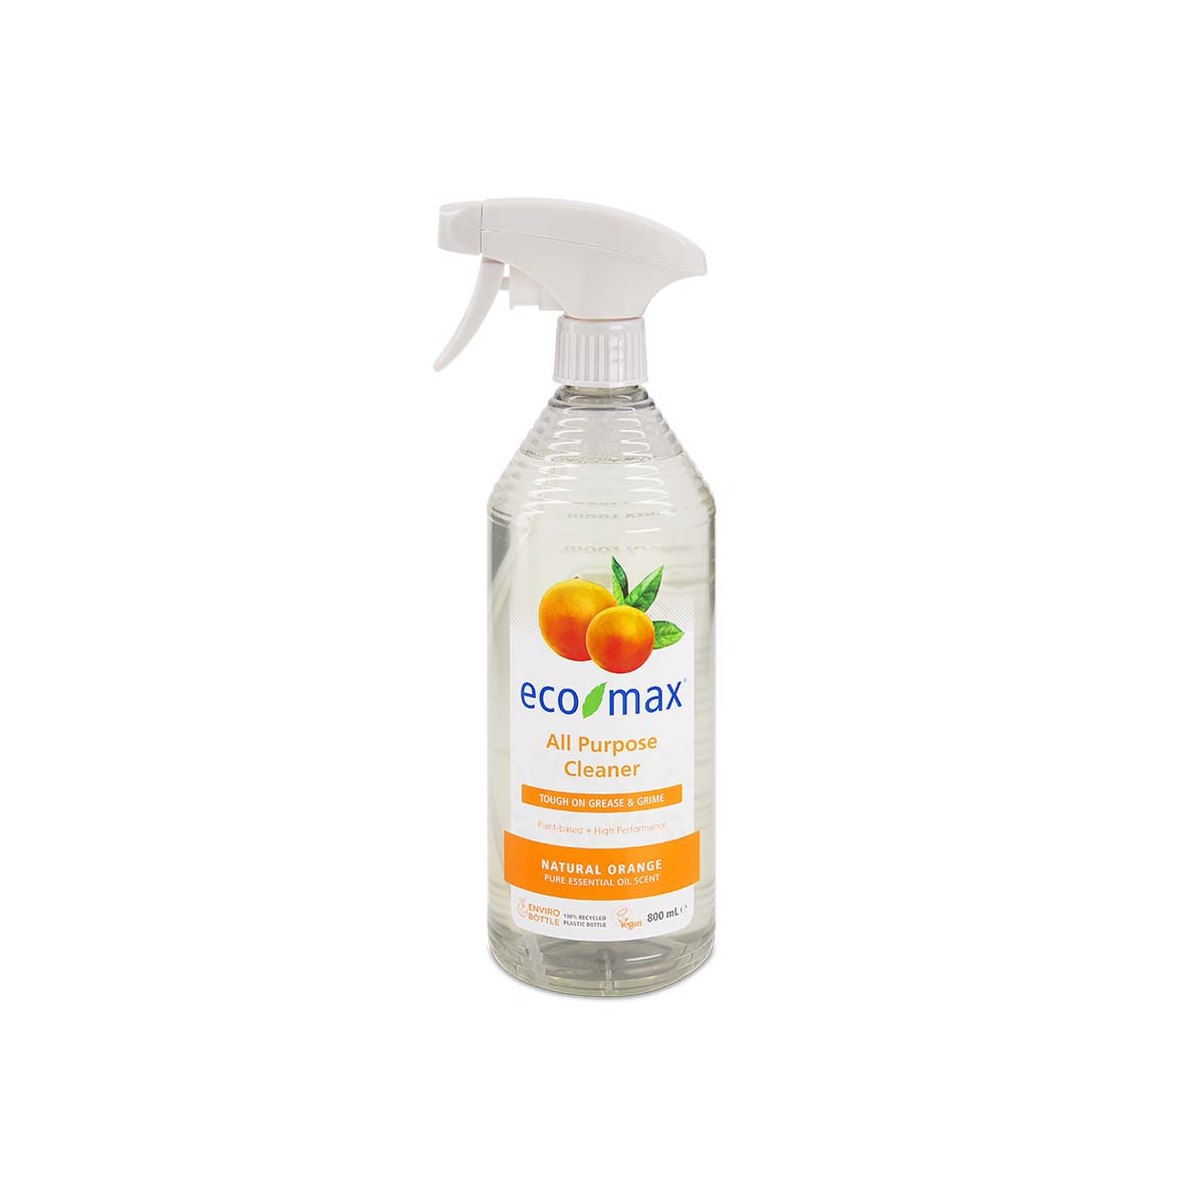 Eco-max-all-purpose-cleaner-800ml